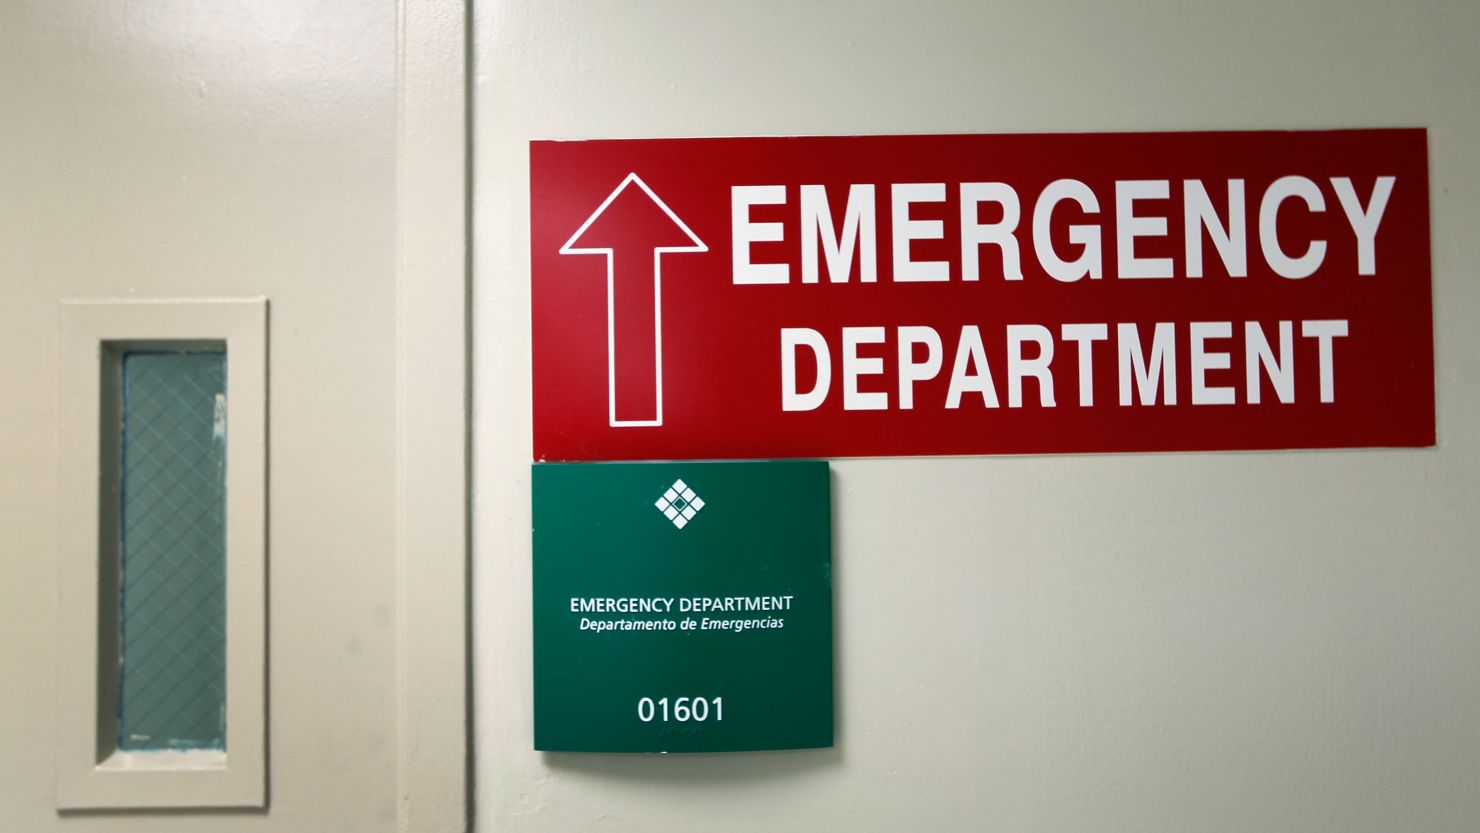 Emergency room closures increase the travel time to an ER, exacerbate crowding and prolong waiting times for care.